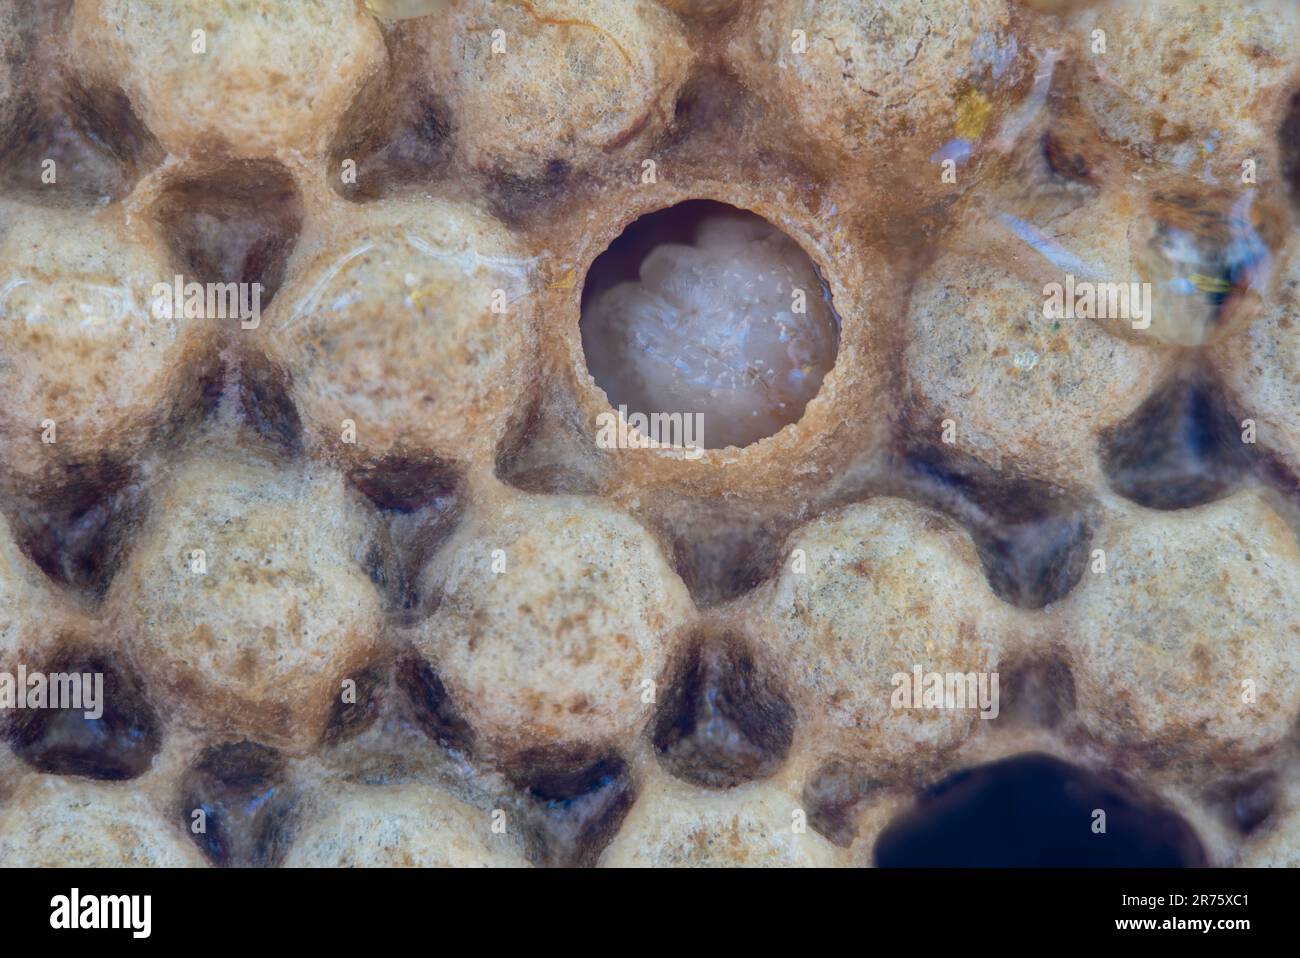 Honeycomb with drone brood, male larvae, Germany Stock Photo